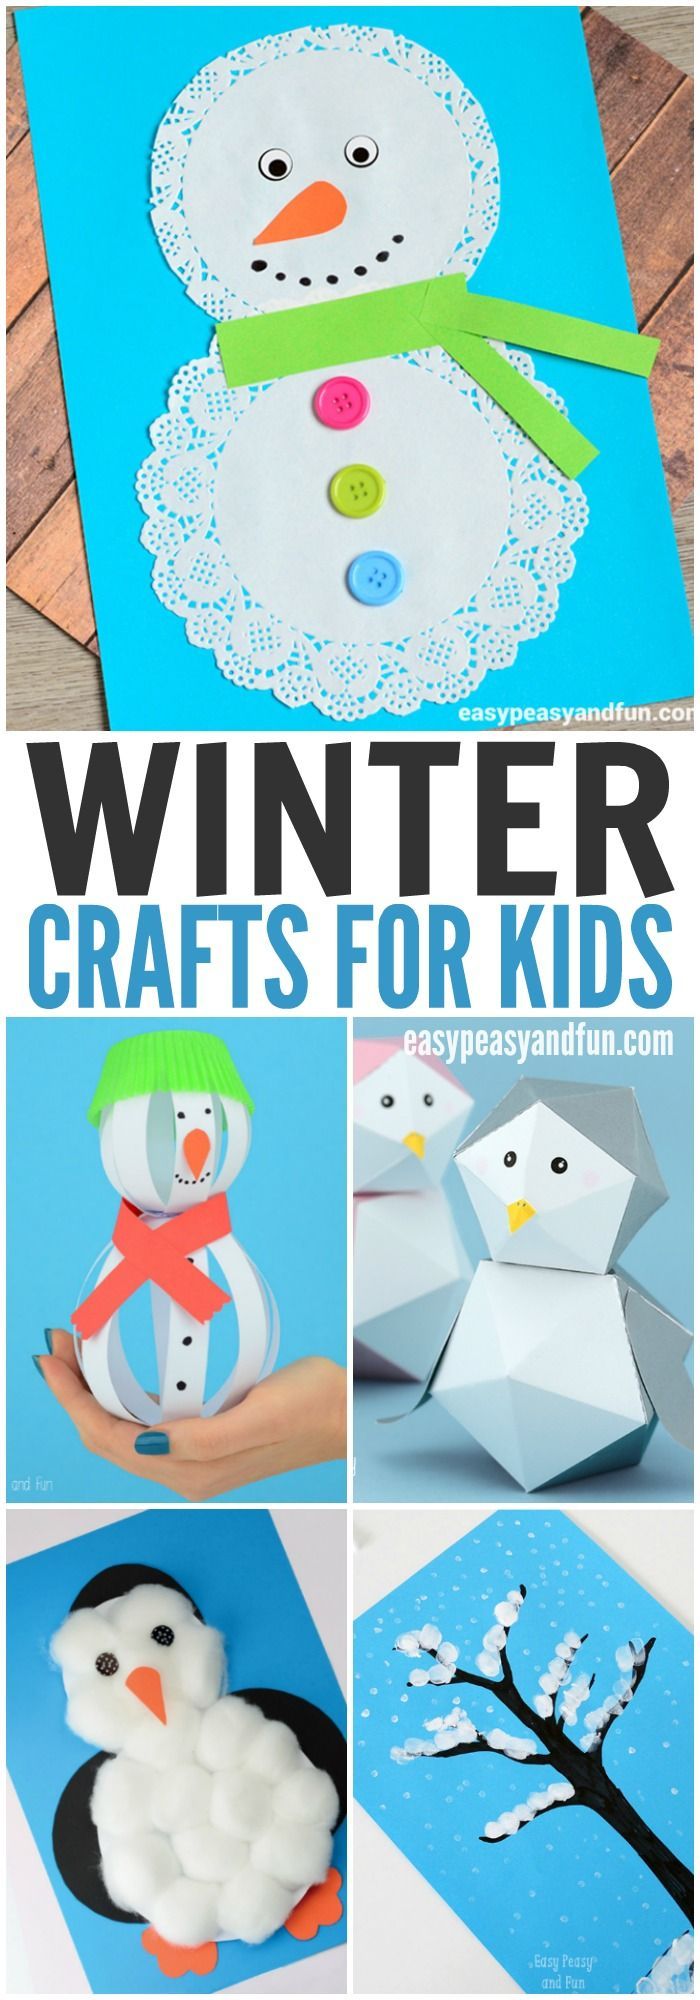 25 young kids crafts
 ideas